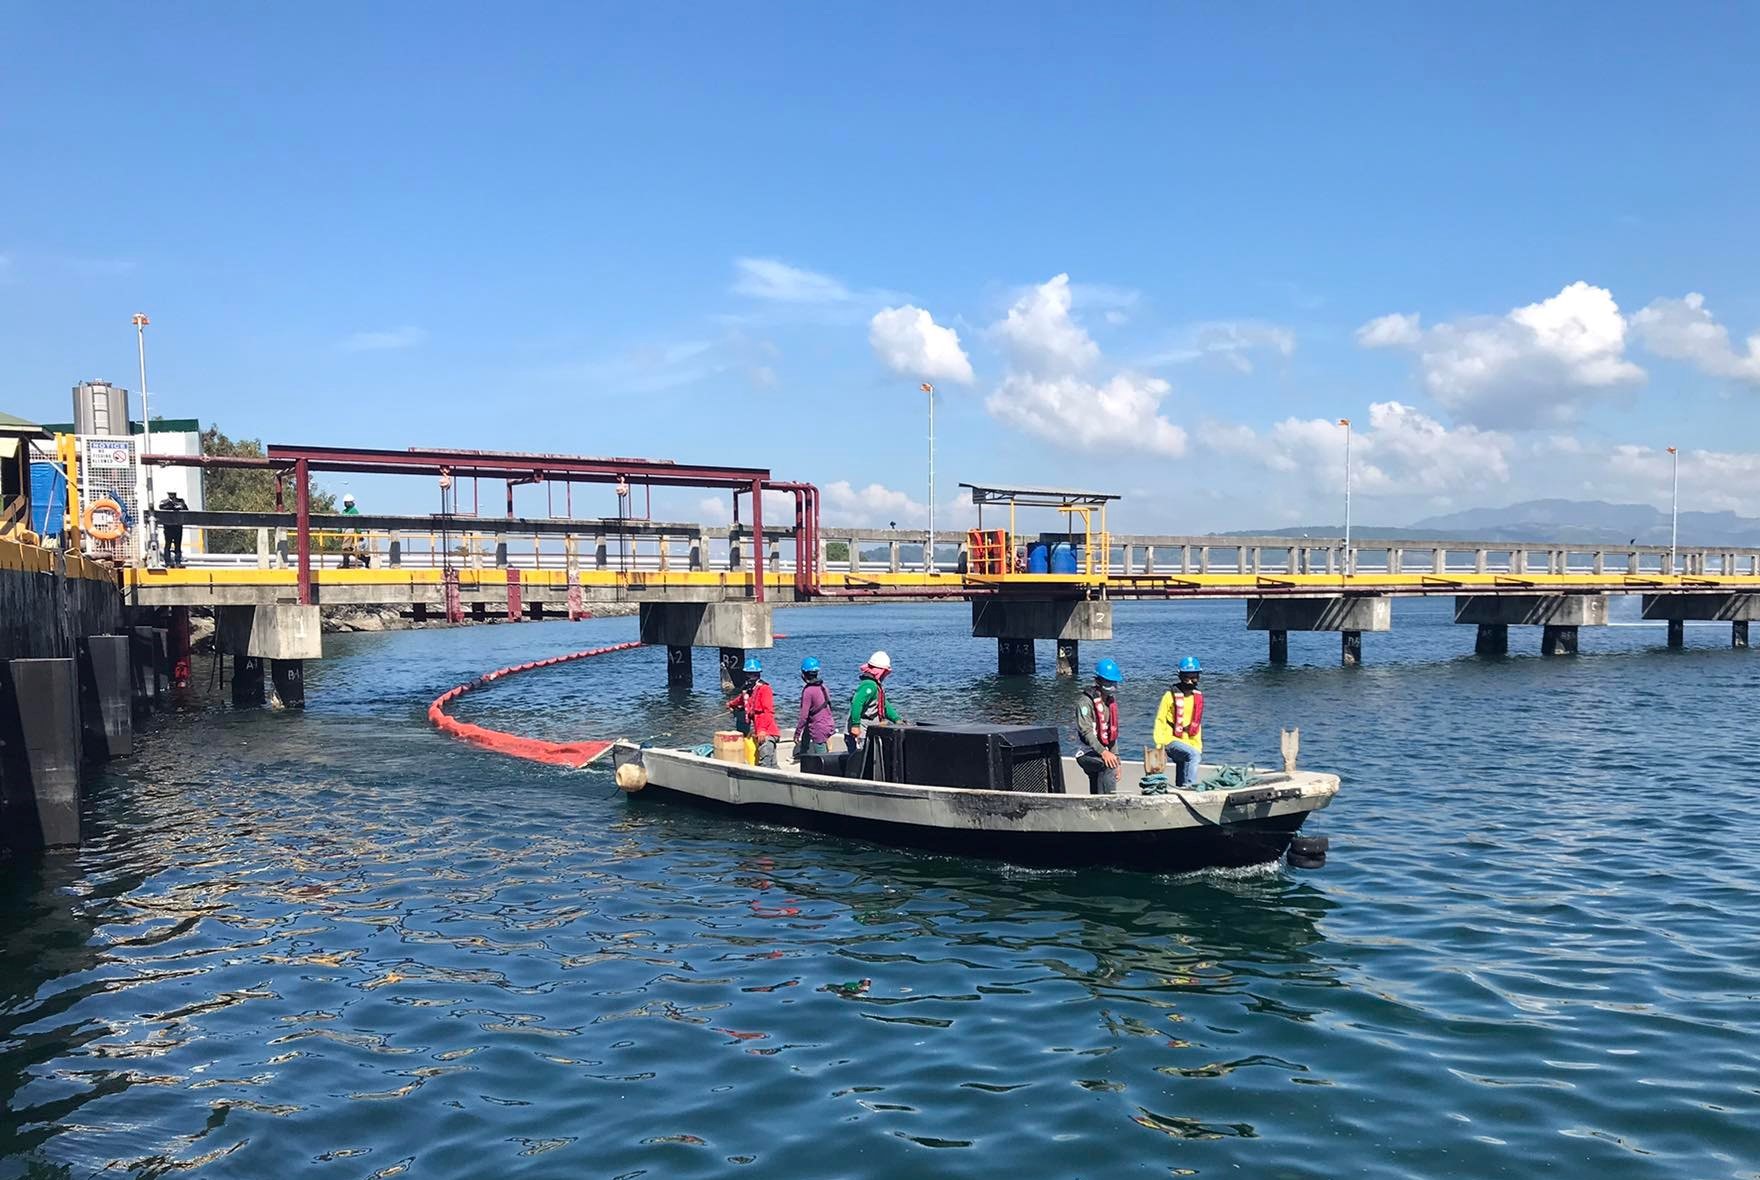 Members of the SBMA Seaport Emergency Response Team lay down a containment boom at the Boton Wharf during an oil spill simulation exercise on Friday